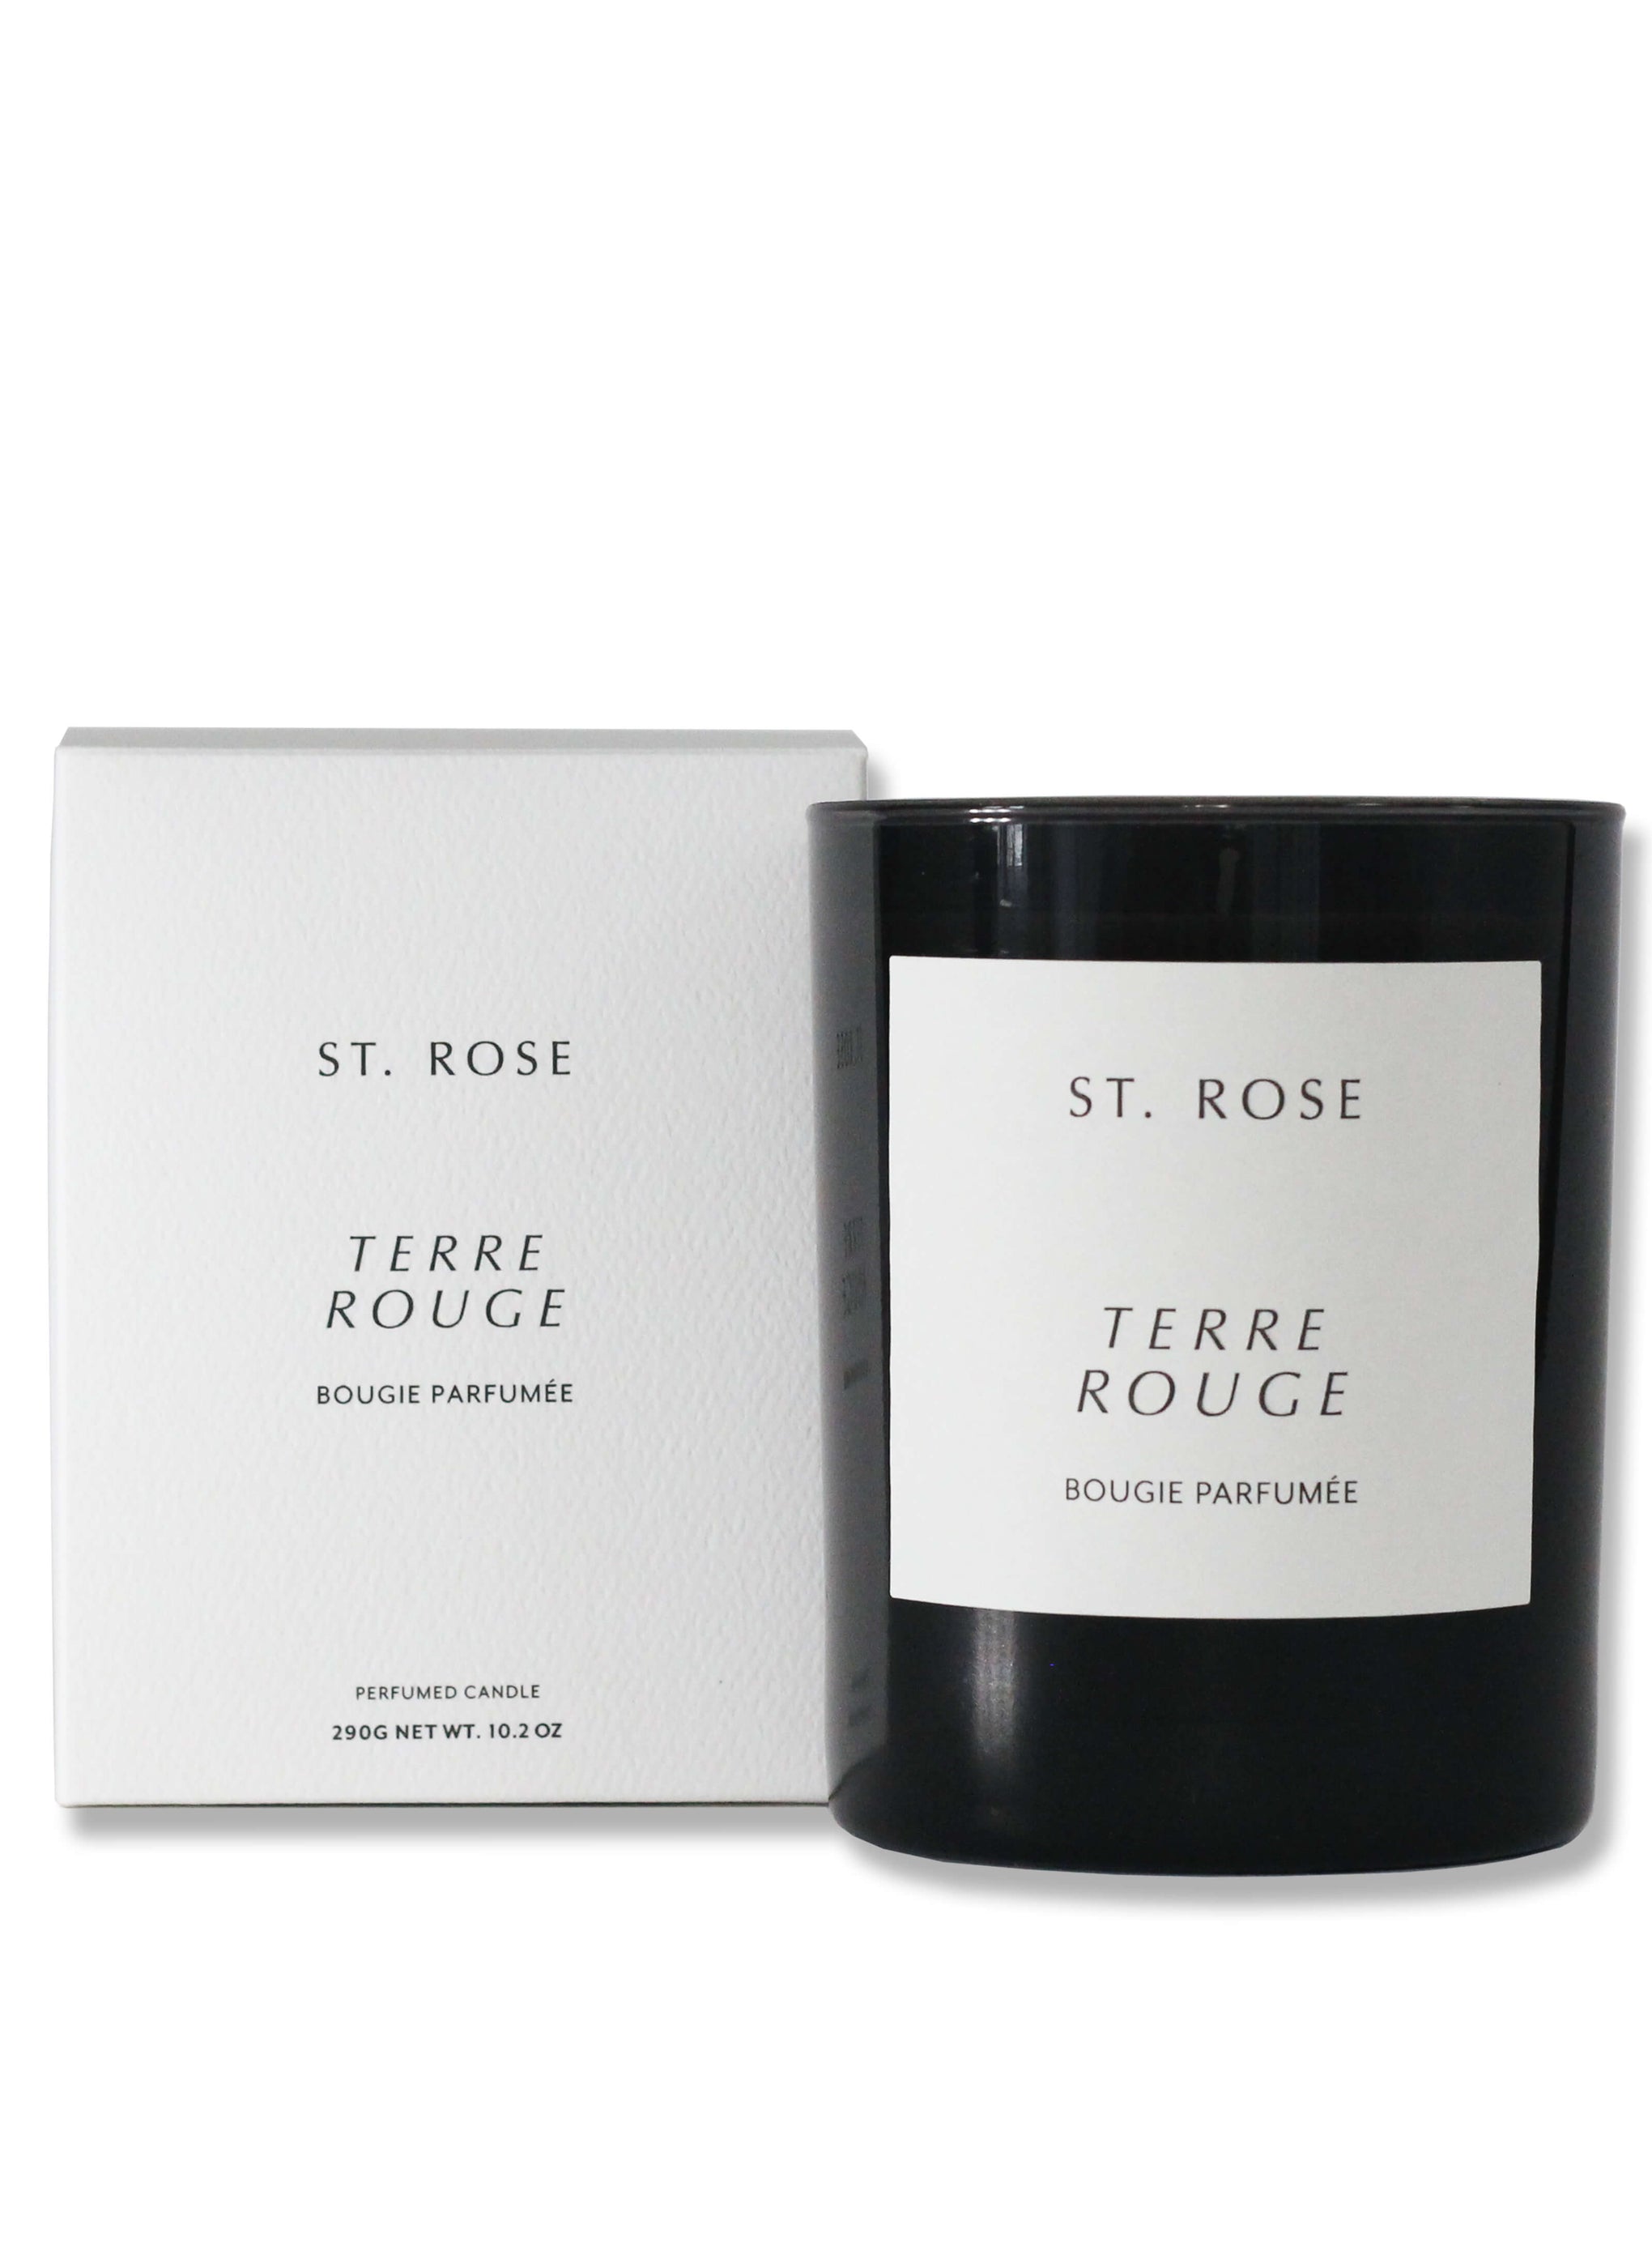 St. Rose Terre Rouge Candle available at The New Trend